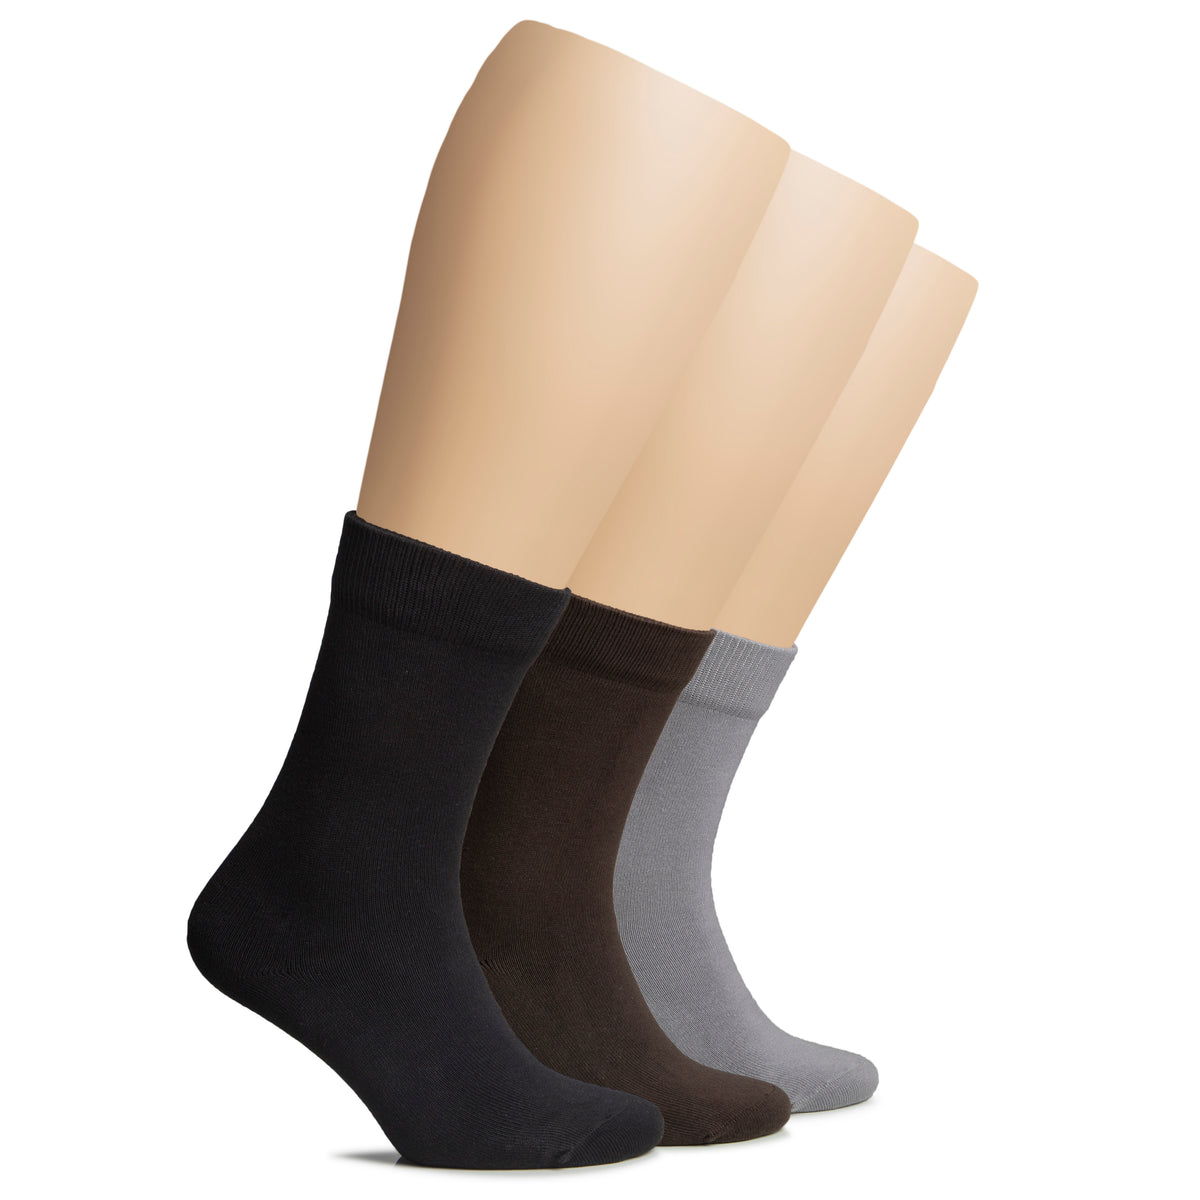 Discover a set of three women's socks in different colors, crafted from soft cotton for ultimate comfort. Ideal for women's winter wear.